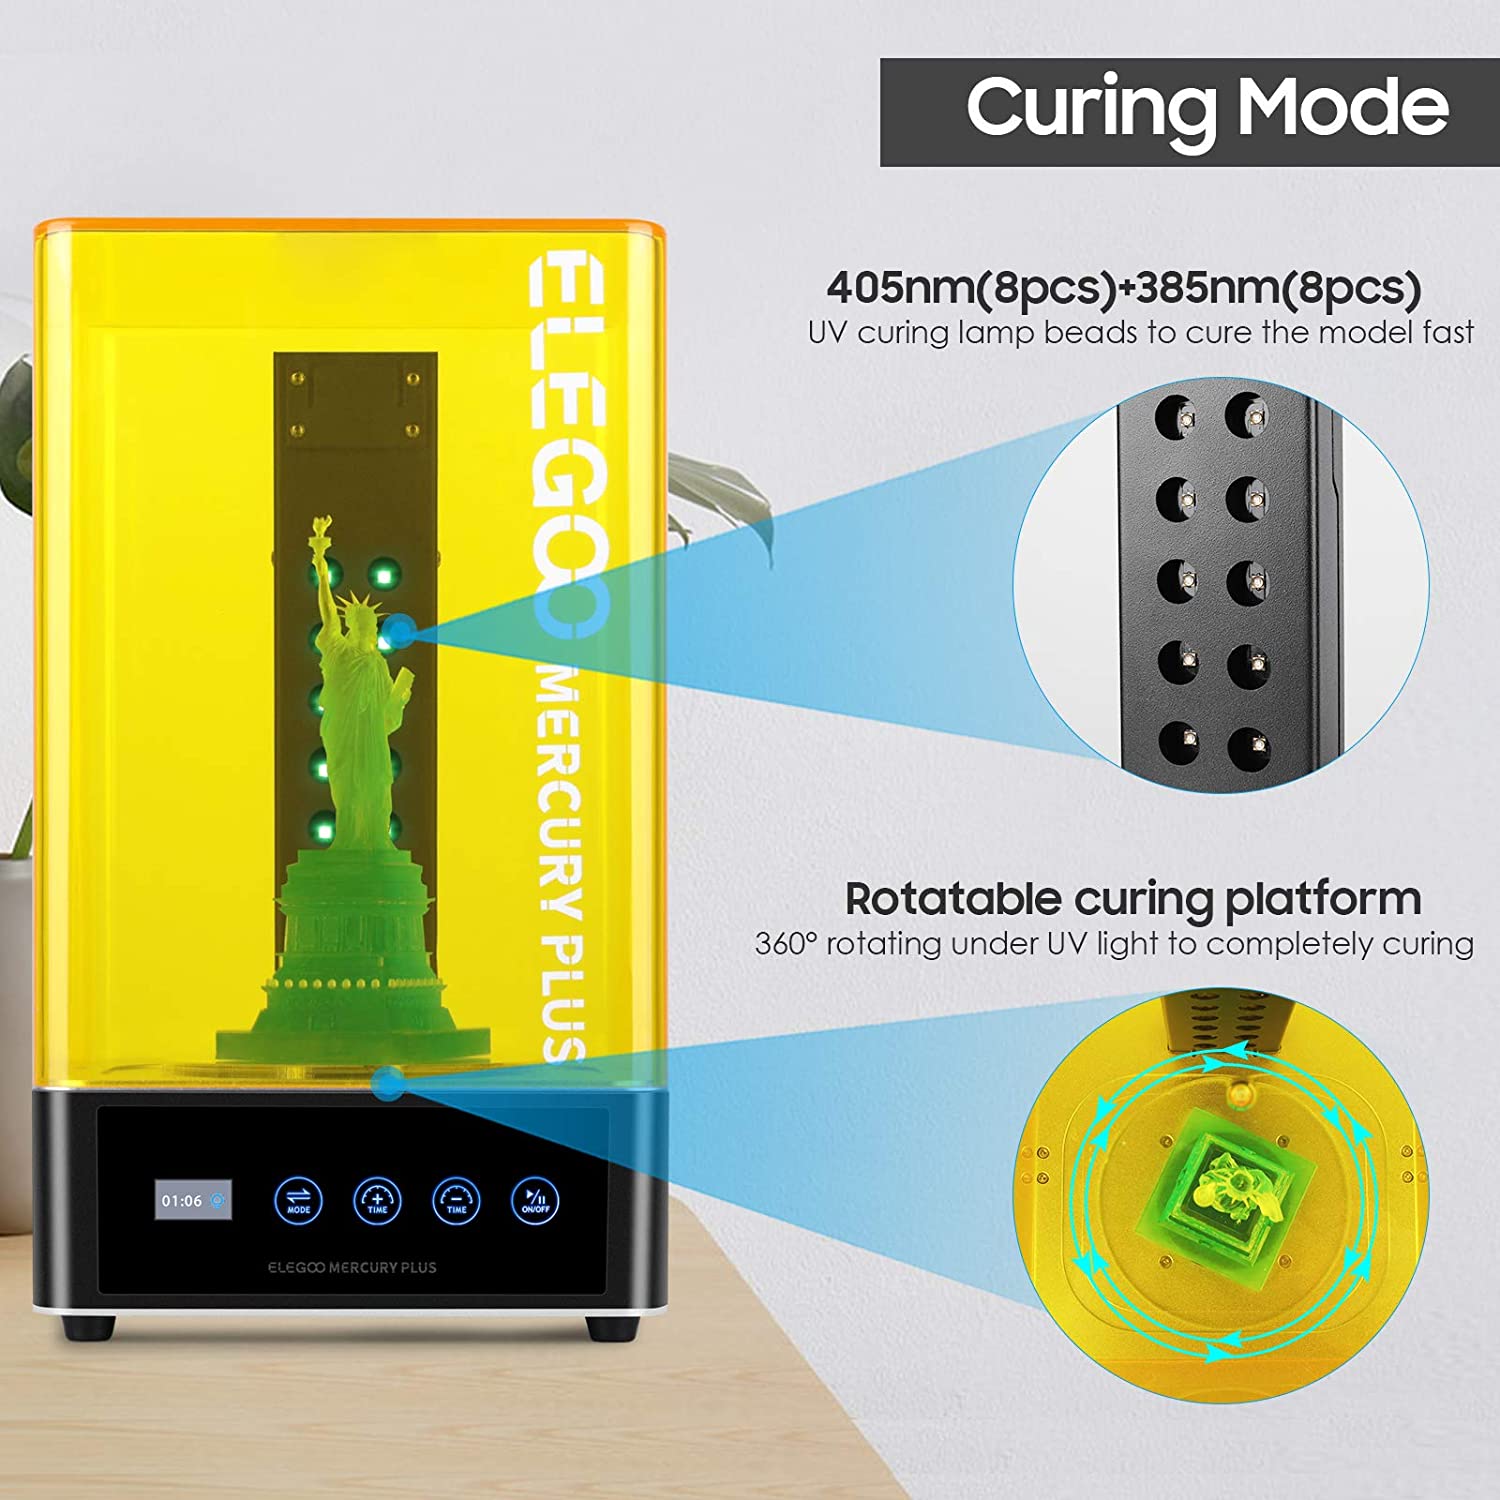 ELEGOO Mercury Plus 2 in 1 Wash & Curing Machine for LCD/DLP/SLA 3D Printed Models Resin UV Curing Box with Rotary Curing Turntable and Washing Bucket